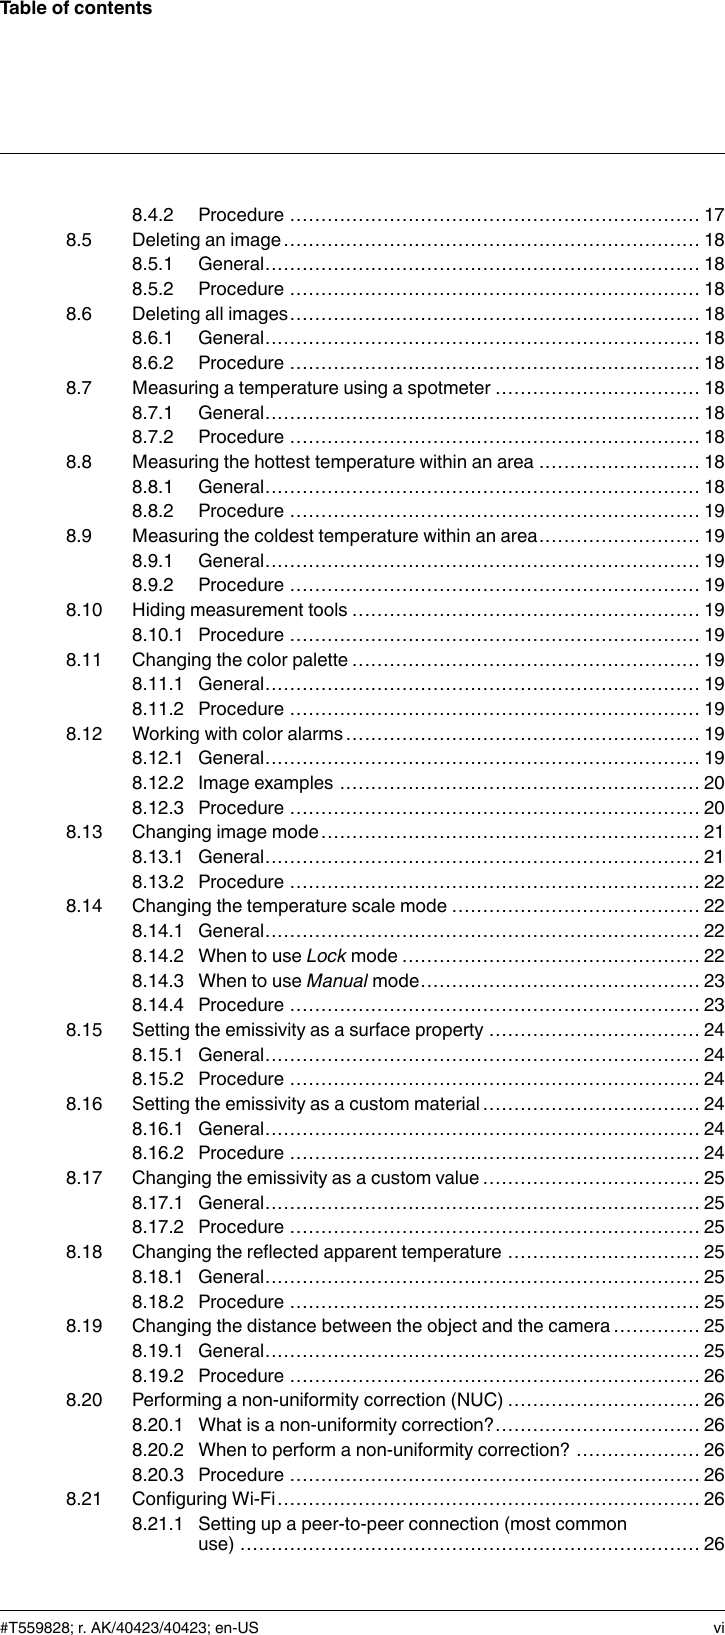 Table of contents8.4.2 Procedure .................................................................. 178.5 Deleting an image................................................................... 188.5.1 General...................................................................... 188.5.2 Procedure .................................................................. 188.6 Deleting all images.................................................................. 188.6.1 General...................................................................... 188.6.2 Procedure .................................................................. 188.7 Measuring a temperature using a spotmeter ................................. 188.7.1 General...................................................................... 188.7.2 Procedure .................................................................. 188.8 Measuring the hottest temperature within an area .......................... 188.8.1 General...................................................................... 188.8.2 Procedure .................................................................. 198.9 Measuring the coldest temperature within an area.......................... 198.9.1 General...................................................................... 198.9.2 Procedure .................................................................. 198.10 Hiding measurement tools ........................................................ 198.10.1 Procedure .................................................................. 198.11 Changing the color palette ........................................................ 198.11.1 General...................................................................... 198.11.2 Procedure .................................................................. 198.12 Working with color alarms ......................................................... 198.12.1 General...................................................................... 198.12.2 Image examples .......................................................... 208.12.3 Procedure .................................................................. 208.13 Changing image mode............................................................. 218.13.1 General...................................................................... 218.13.2 Procedure .................................................................. 228.14 Changing the temperature scale mode ........................................ 228.14.1 General...................................................................... 228.14.2 When to use Lock mode ................................................ 228.14.3 When to use Manual mode............................................. 238.14.4 Procedure .................................................................. 238.15 Setting the emissivity as a surface property .................................. 248.15.1 General...................................................................... 248.15.2 Procedure .................................................................. 248.16 Setting the emissivity as a custom material ................................... 248.16.1 General...................................................................... 248.16.2 Procedure .................................................................. 248.17 Changing the emissivity as a custom value ................................... 258.17.1 General...................................................................... 258.17.2 Procedure .................................................................. 258.18 Changing the reflected apparent temperature ............................... 258.18.1 General...................................................................... 258.18.2 Procedure .................................................................. 258.19 Changing the distance between the object and the camera .............. 258.19.1 General...................................................................... 258.19.2 Procedure .................................................................. 268.20 Performing a non-uniformity correction (NUC) ............................... 268.20.1 What is a non-uniformity correction?................................. 268.20.2 When to perform a non-uniformity correction? .................... 268.20.3 Procedure .................................................................. 268.21 Configuring Wi-Fi.................................................................... 268.21.1 Setting up a peer-to-peer connection (most commonuse) .......................................................................... 26#T559828; r. AK/40423/40423; en-US vi